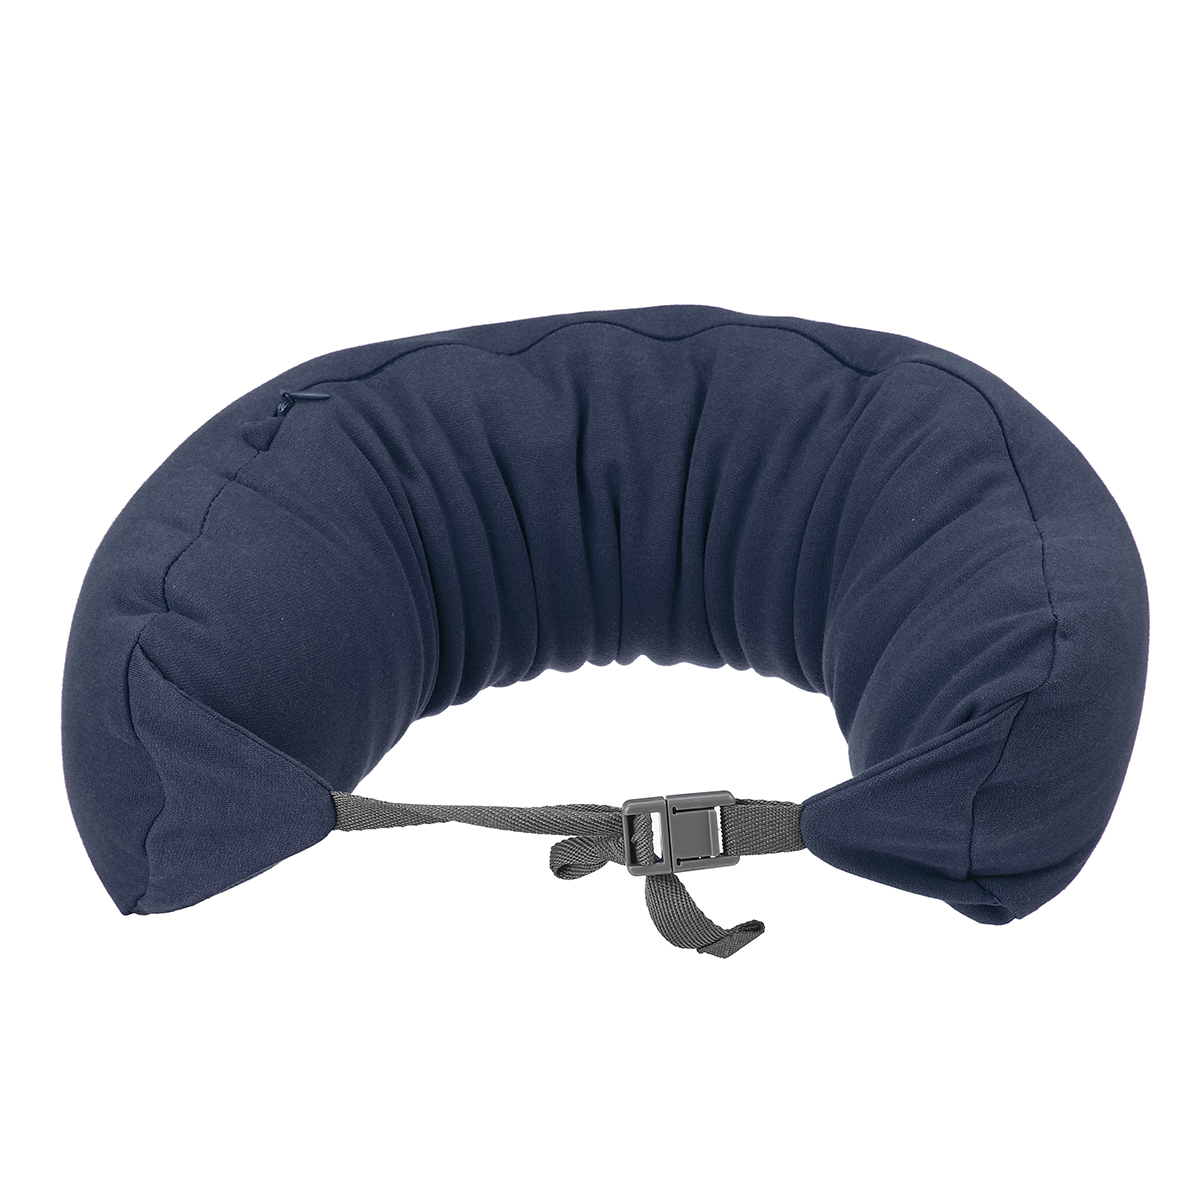 U-shaped-Pillow-Sleeping-Nap-Neck-Support-Cushion-With-Hat-Travel-Office-Home-Fitness-Relaxing-Pillo-1656404-4